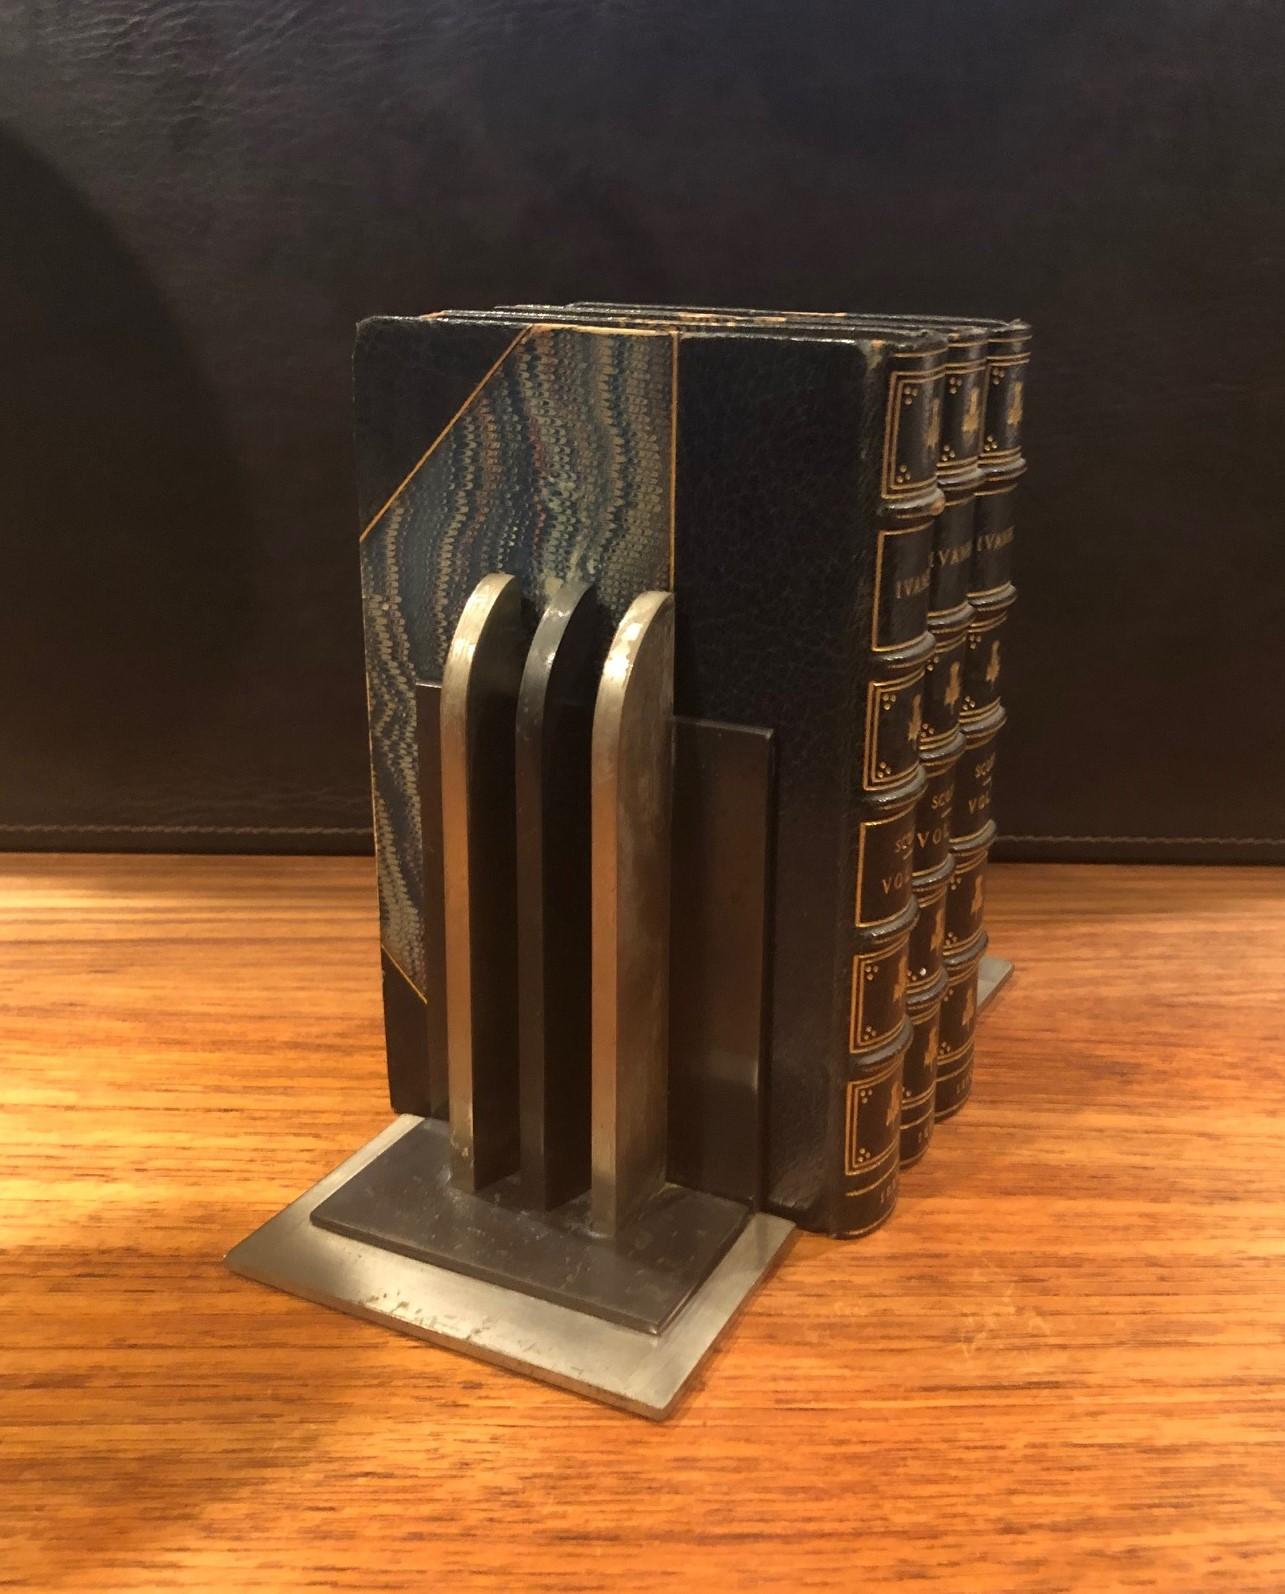 Pair of Machine Age Art Deco Bookends by Walter Von Nessen for Chase & Co. No 6